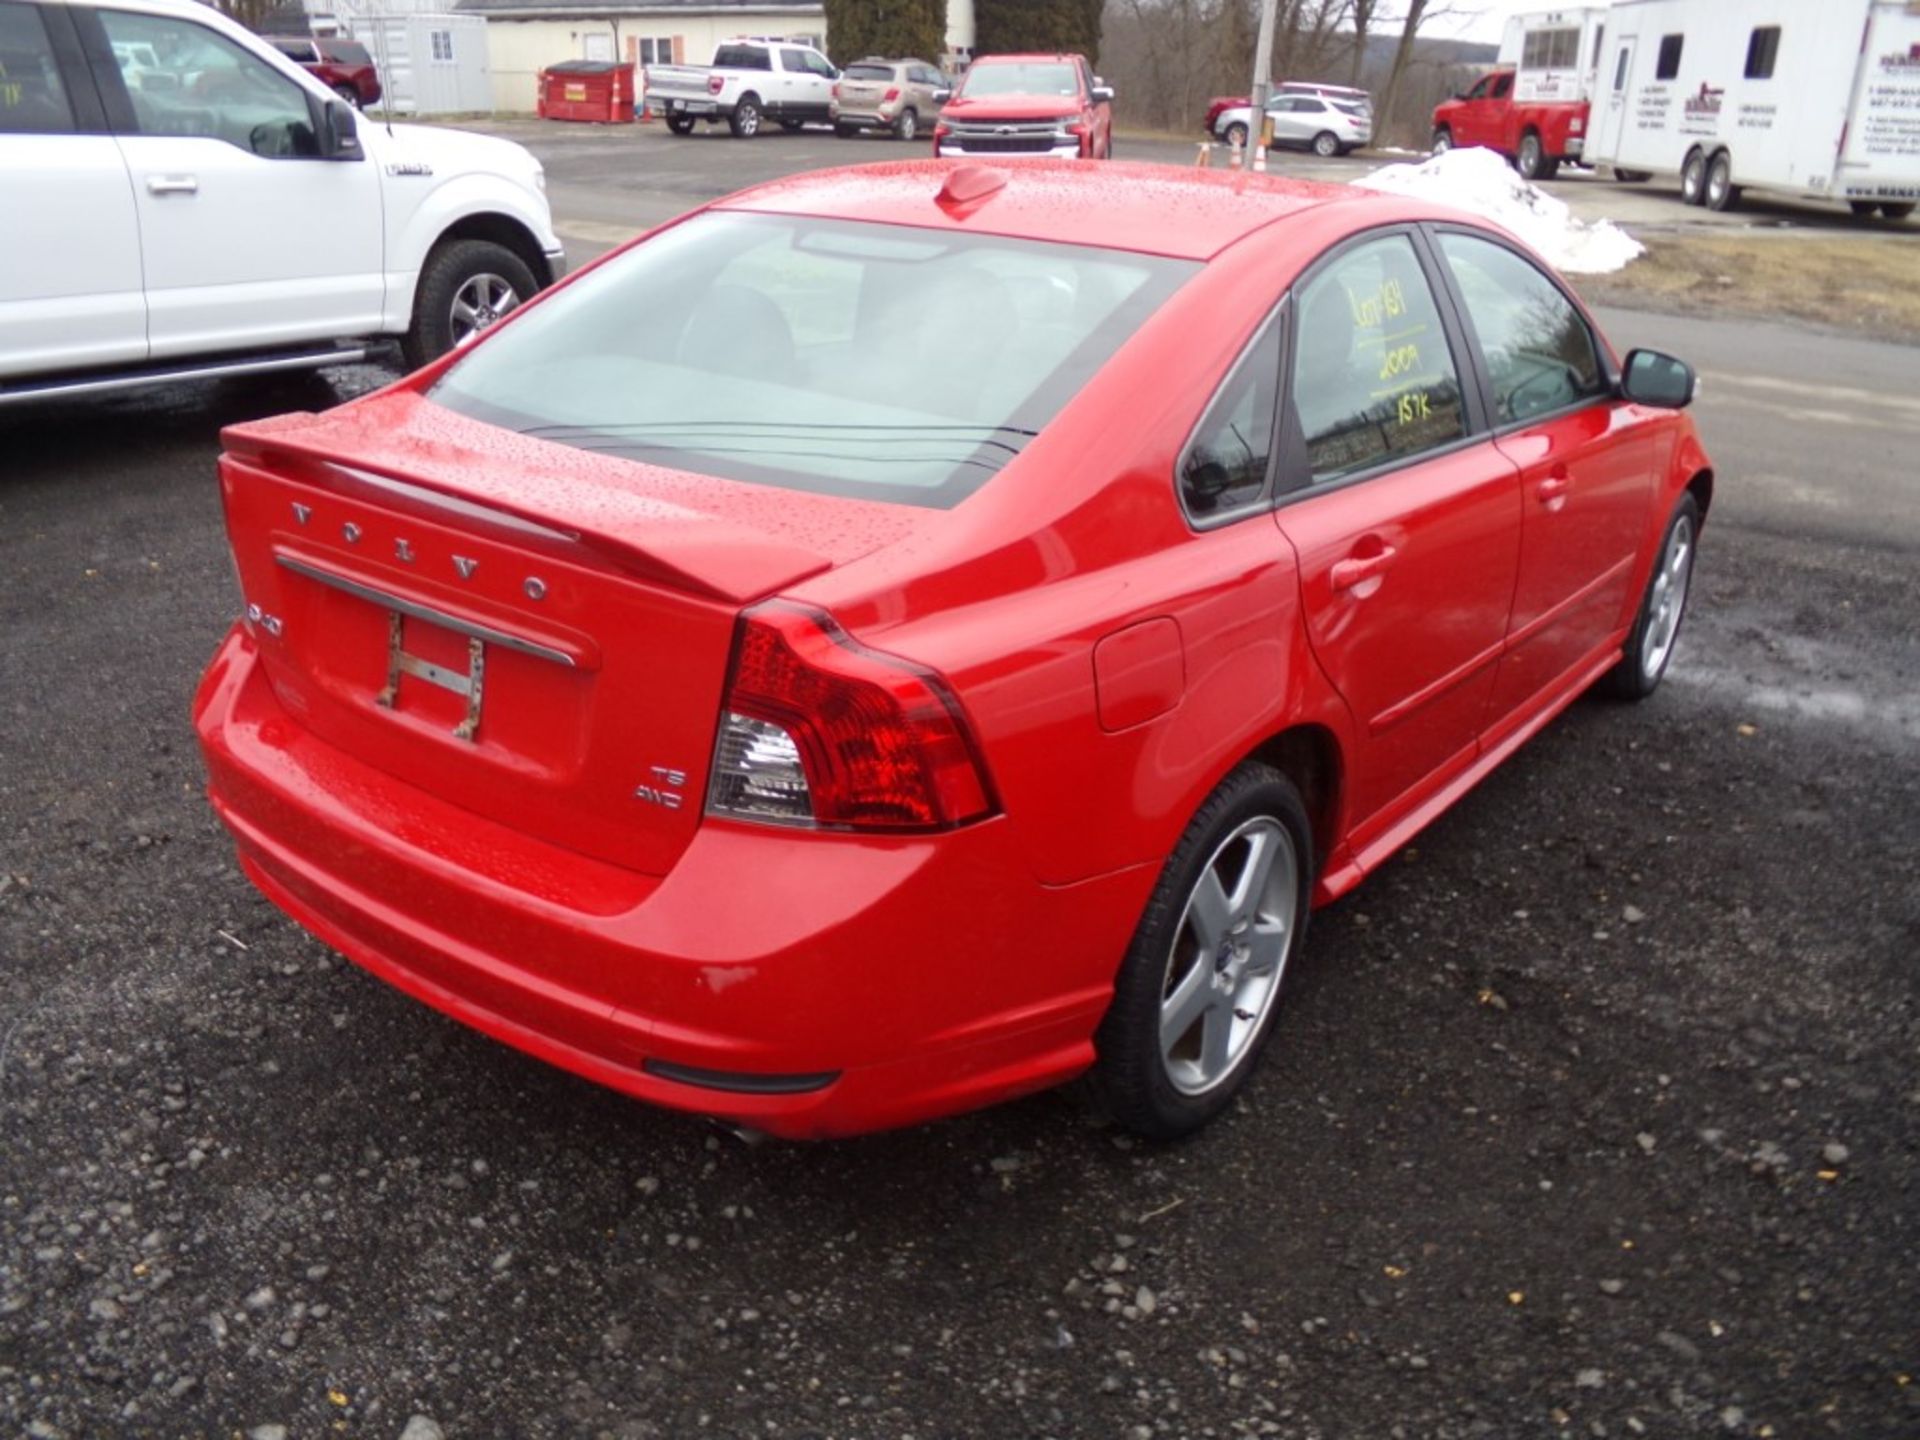 2009 Volvo S40 T5, AWD, Red, Leather, Sunroof, 157,030 Miles, VIN#: YV1MH672192449641,SMALL DENT L/S - Image 3 of 4